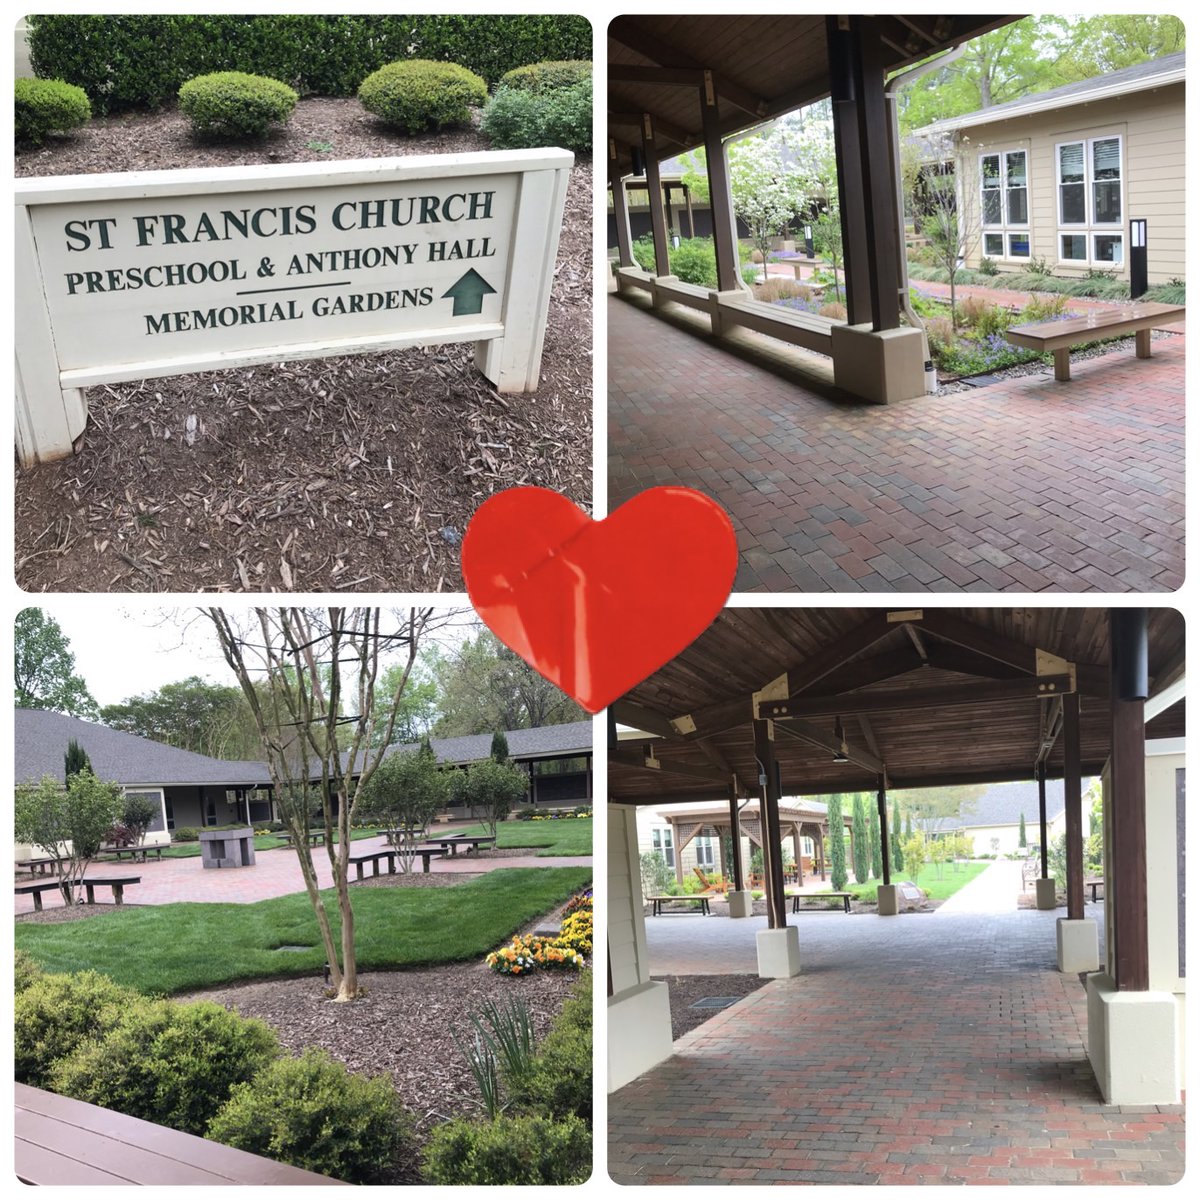 We enjoyed performing four puppet shows for the welcoming students and staff at  St. Francis of Assisi PreSchool. What beautiful and serene grounds for enriching minds and hearts ! Stfrancisraleigh @stfrancisraleigh #preschool #puppetshow #ncpreschool #puppetshowinc